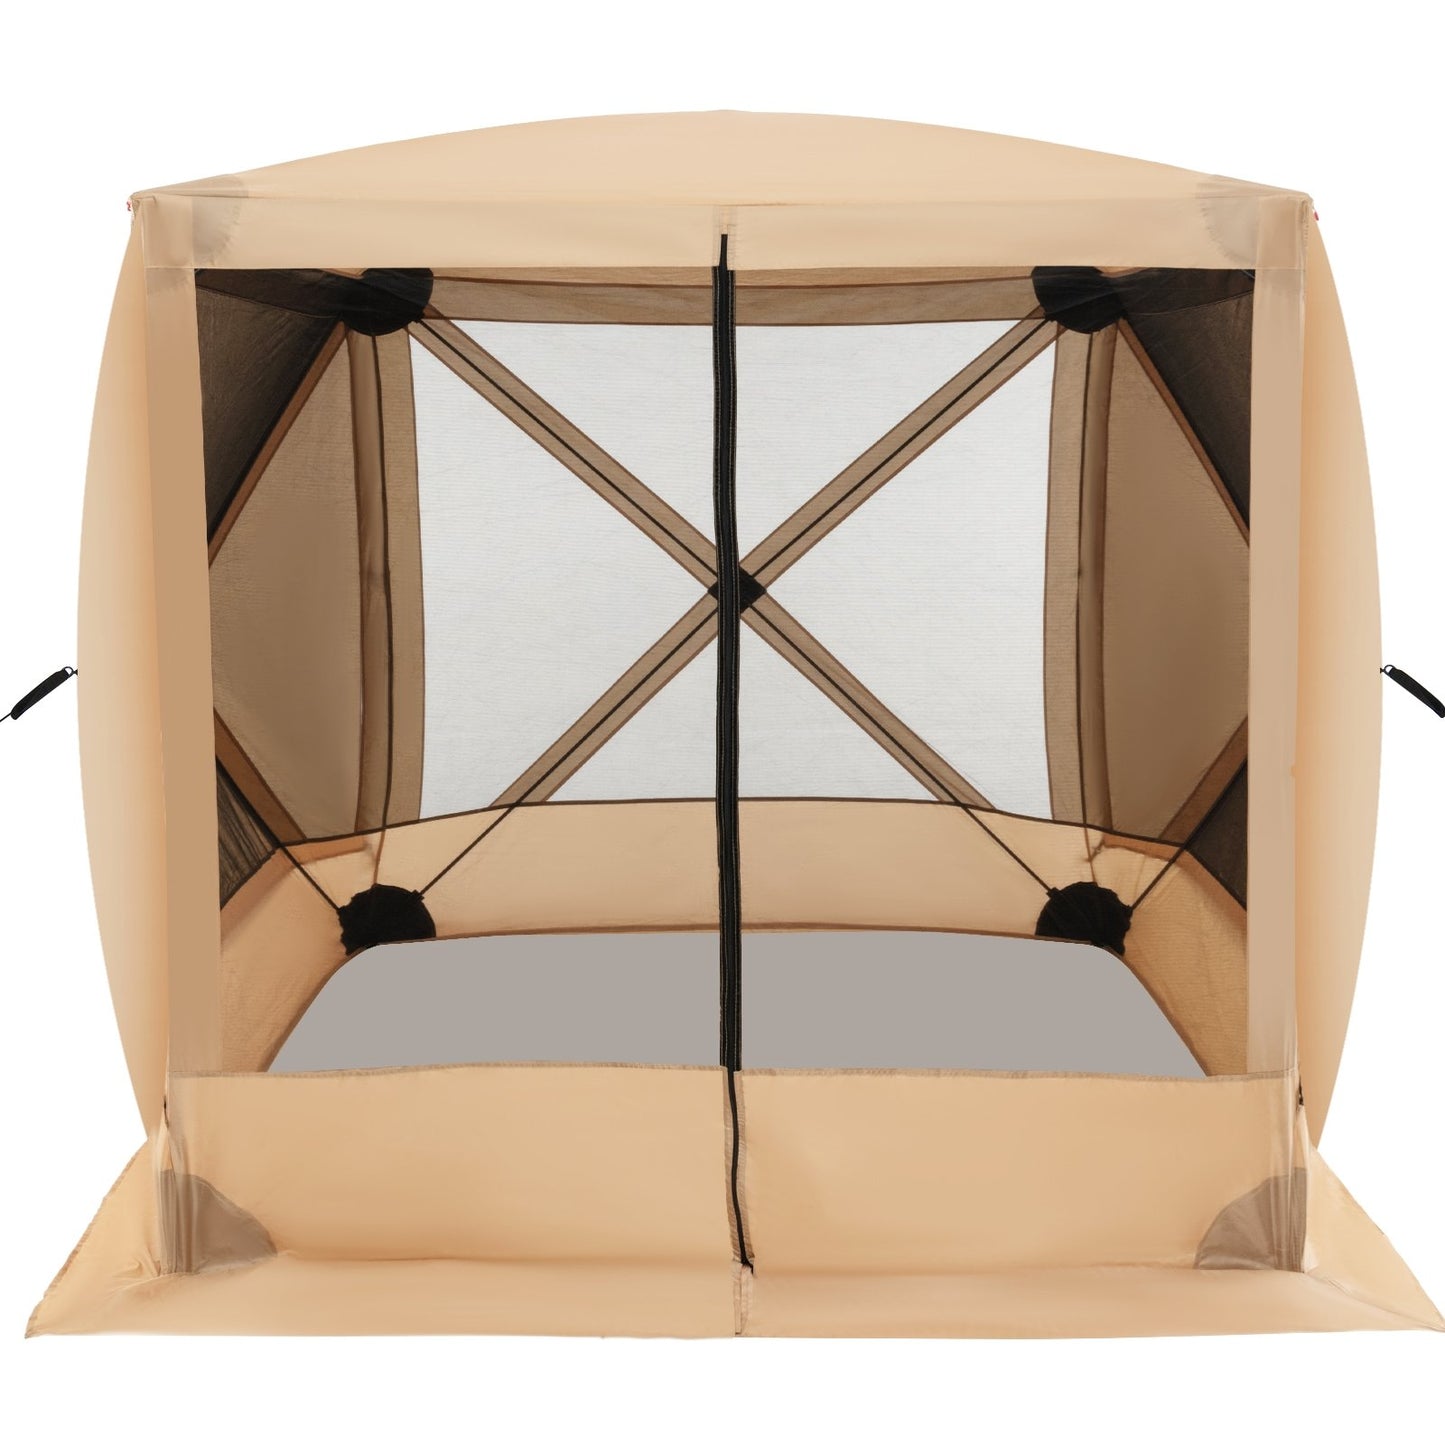 6.7 x 6.7 Feet Pop Up Gazebo with Netting and Carry Bag, Coffee